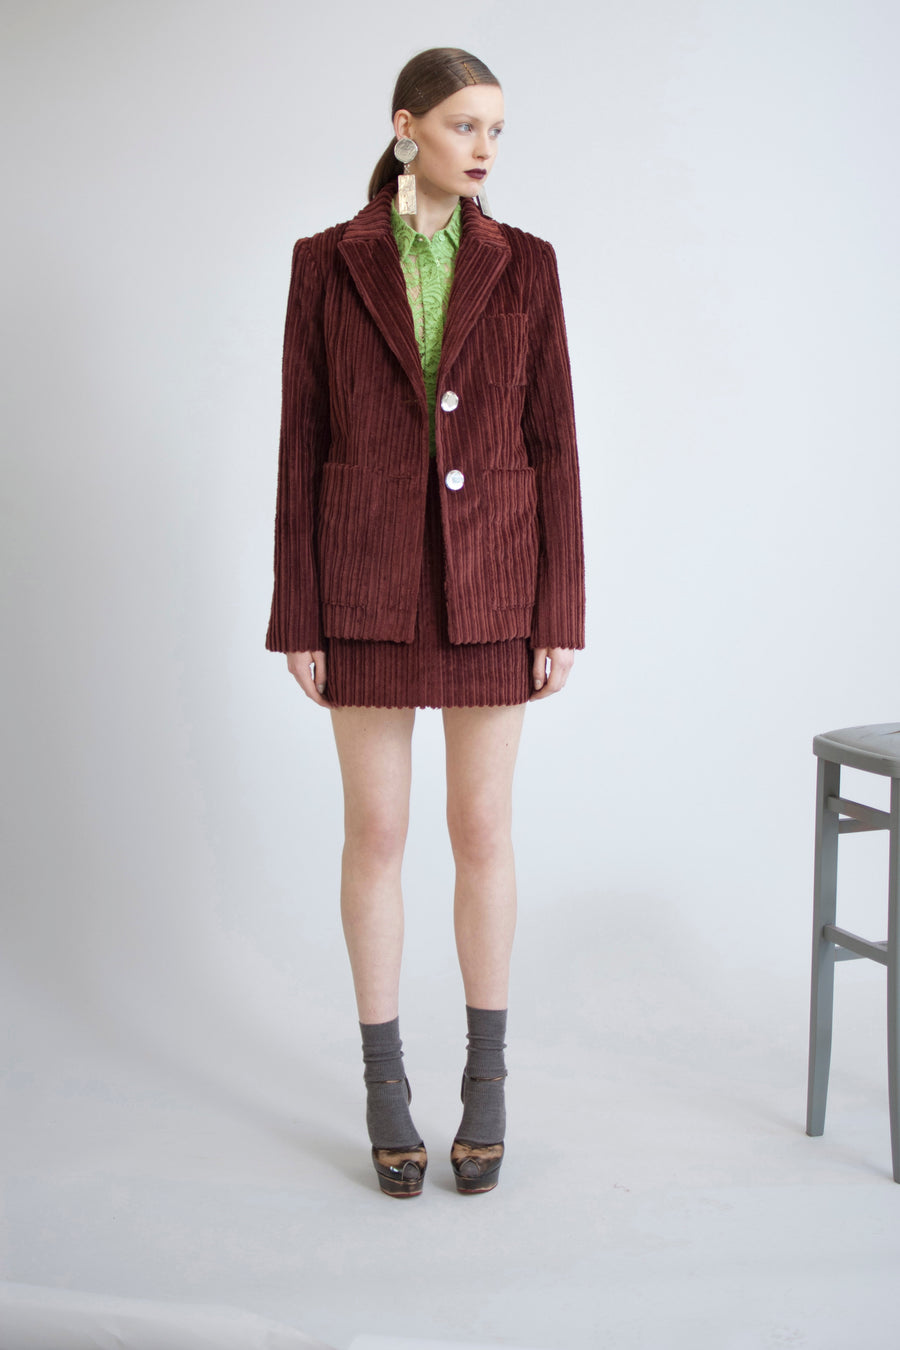 AW2015 / Look 16